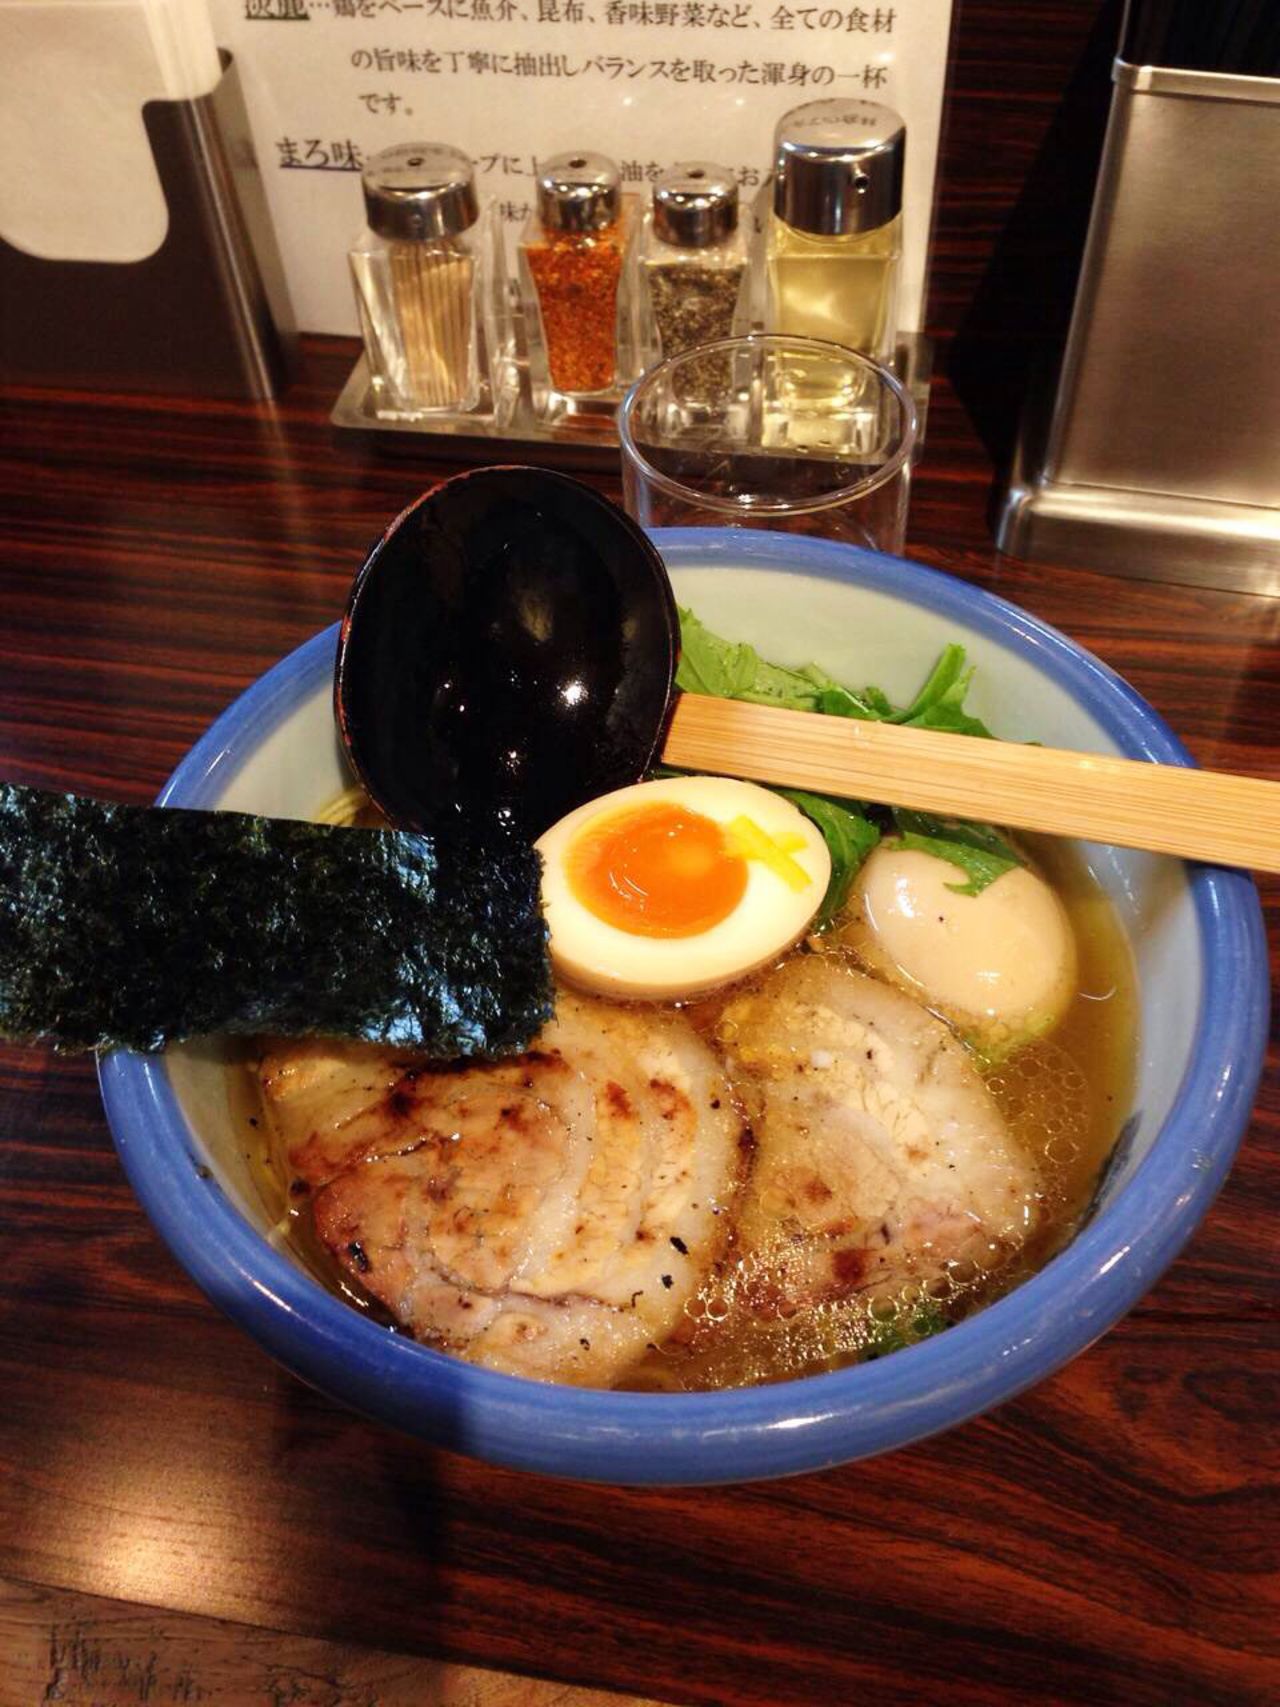 Kitchen Street and Tokyo Ramen Street are located at the station's Yaesu exit. Some of Tokyo's most acclaimed ramen joints have set up shop here.